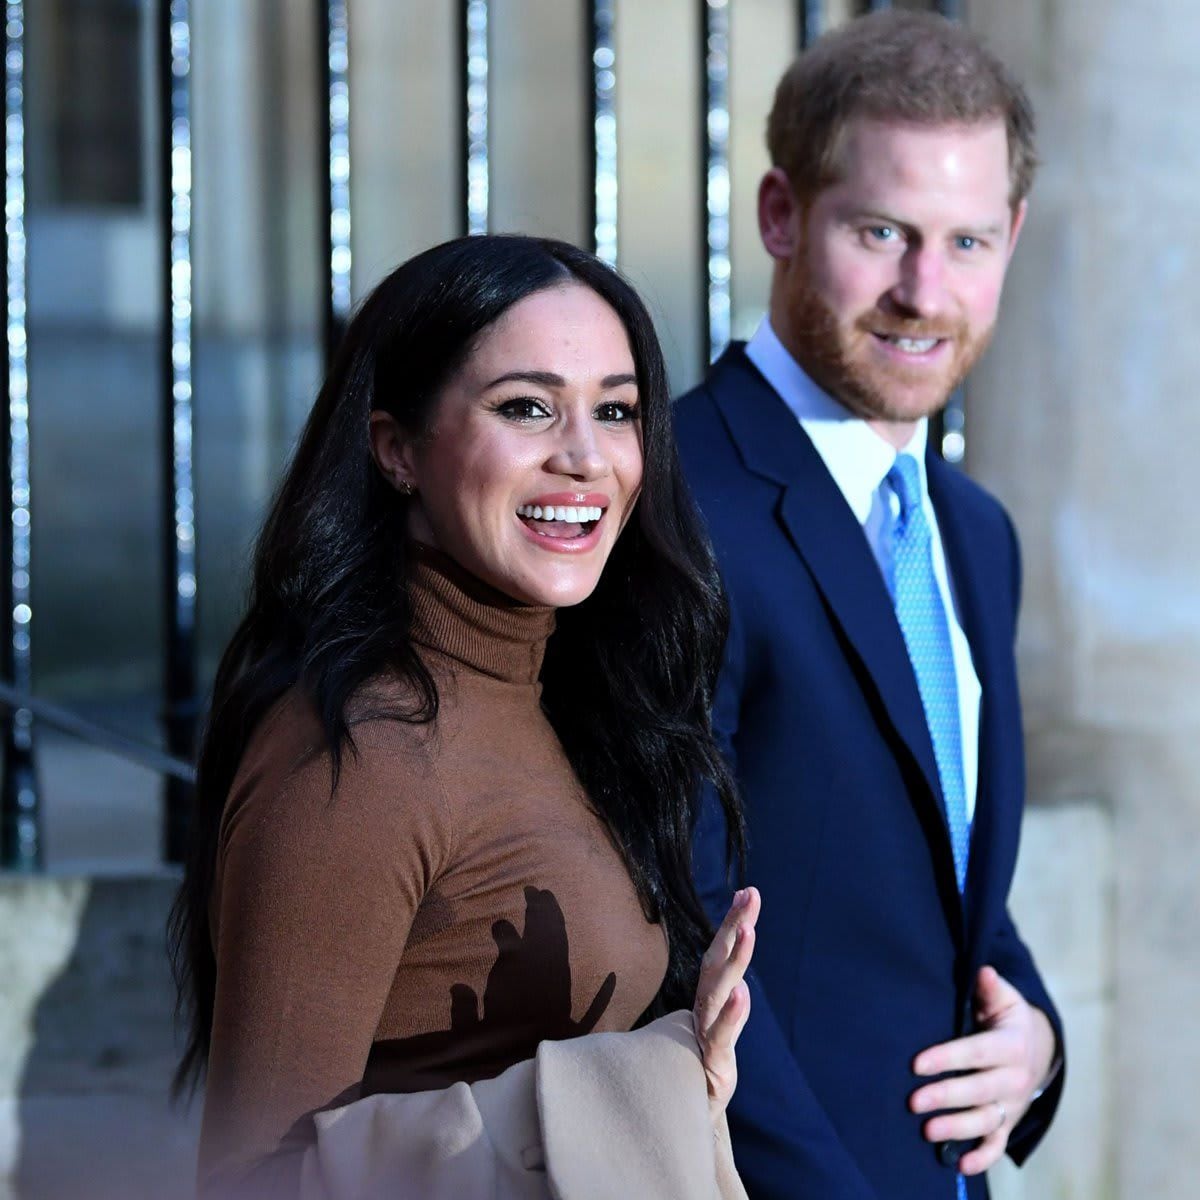 Meghan and Harry will speak in person at Global Citizen Live in NYC